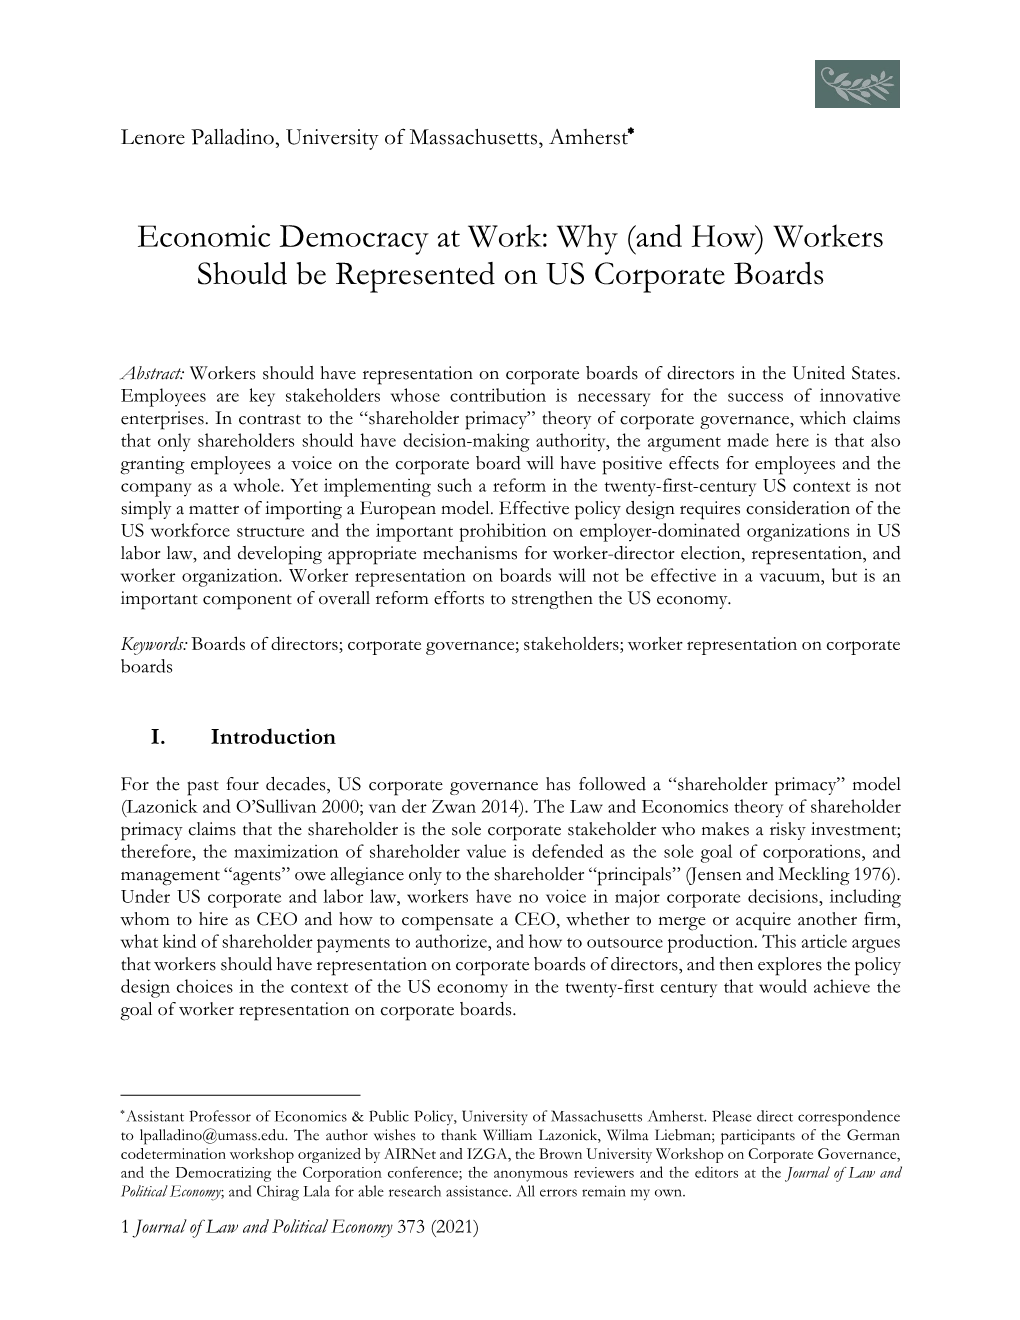 Economic Democracy at Work: Why (And How) Workers Should Be Represented on US Corporate Boards